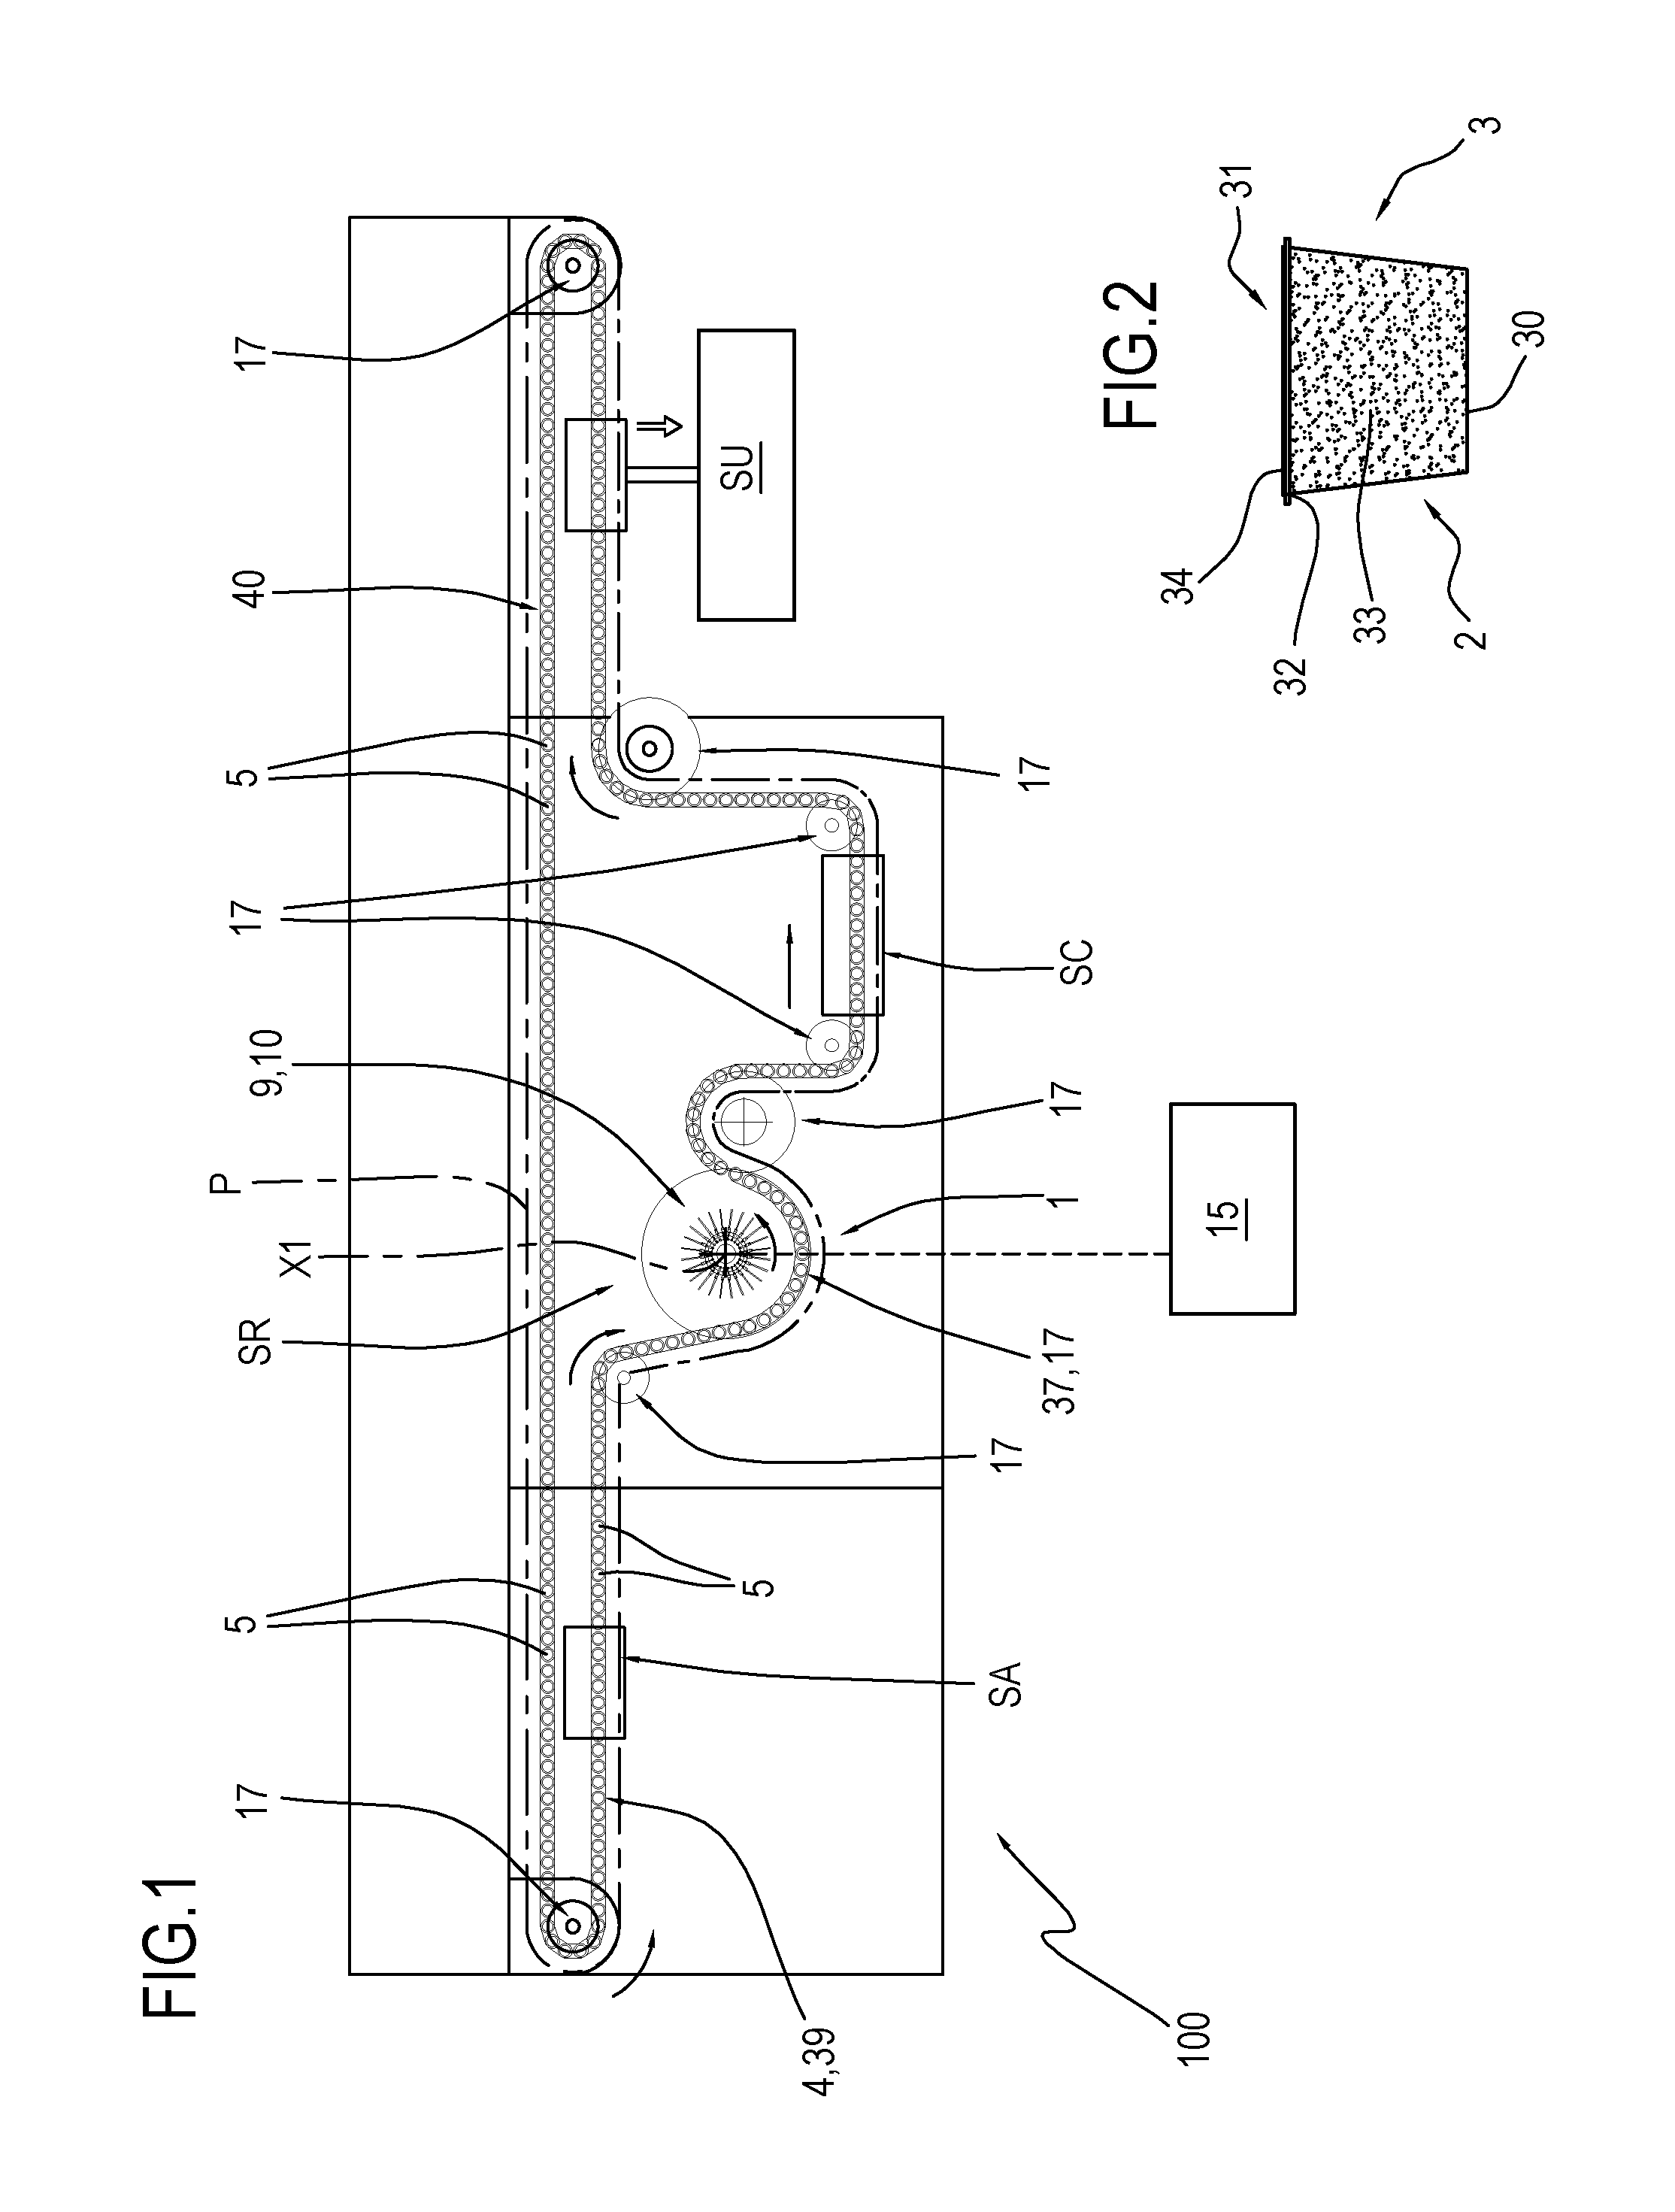 Unit and method for filling containers forming single-use capsules for extraction or infusion beverages